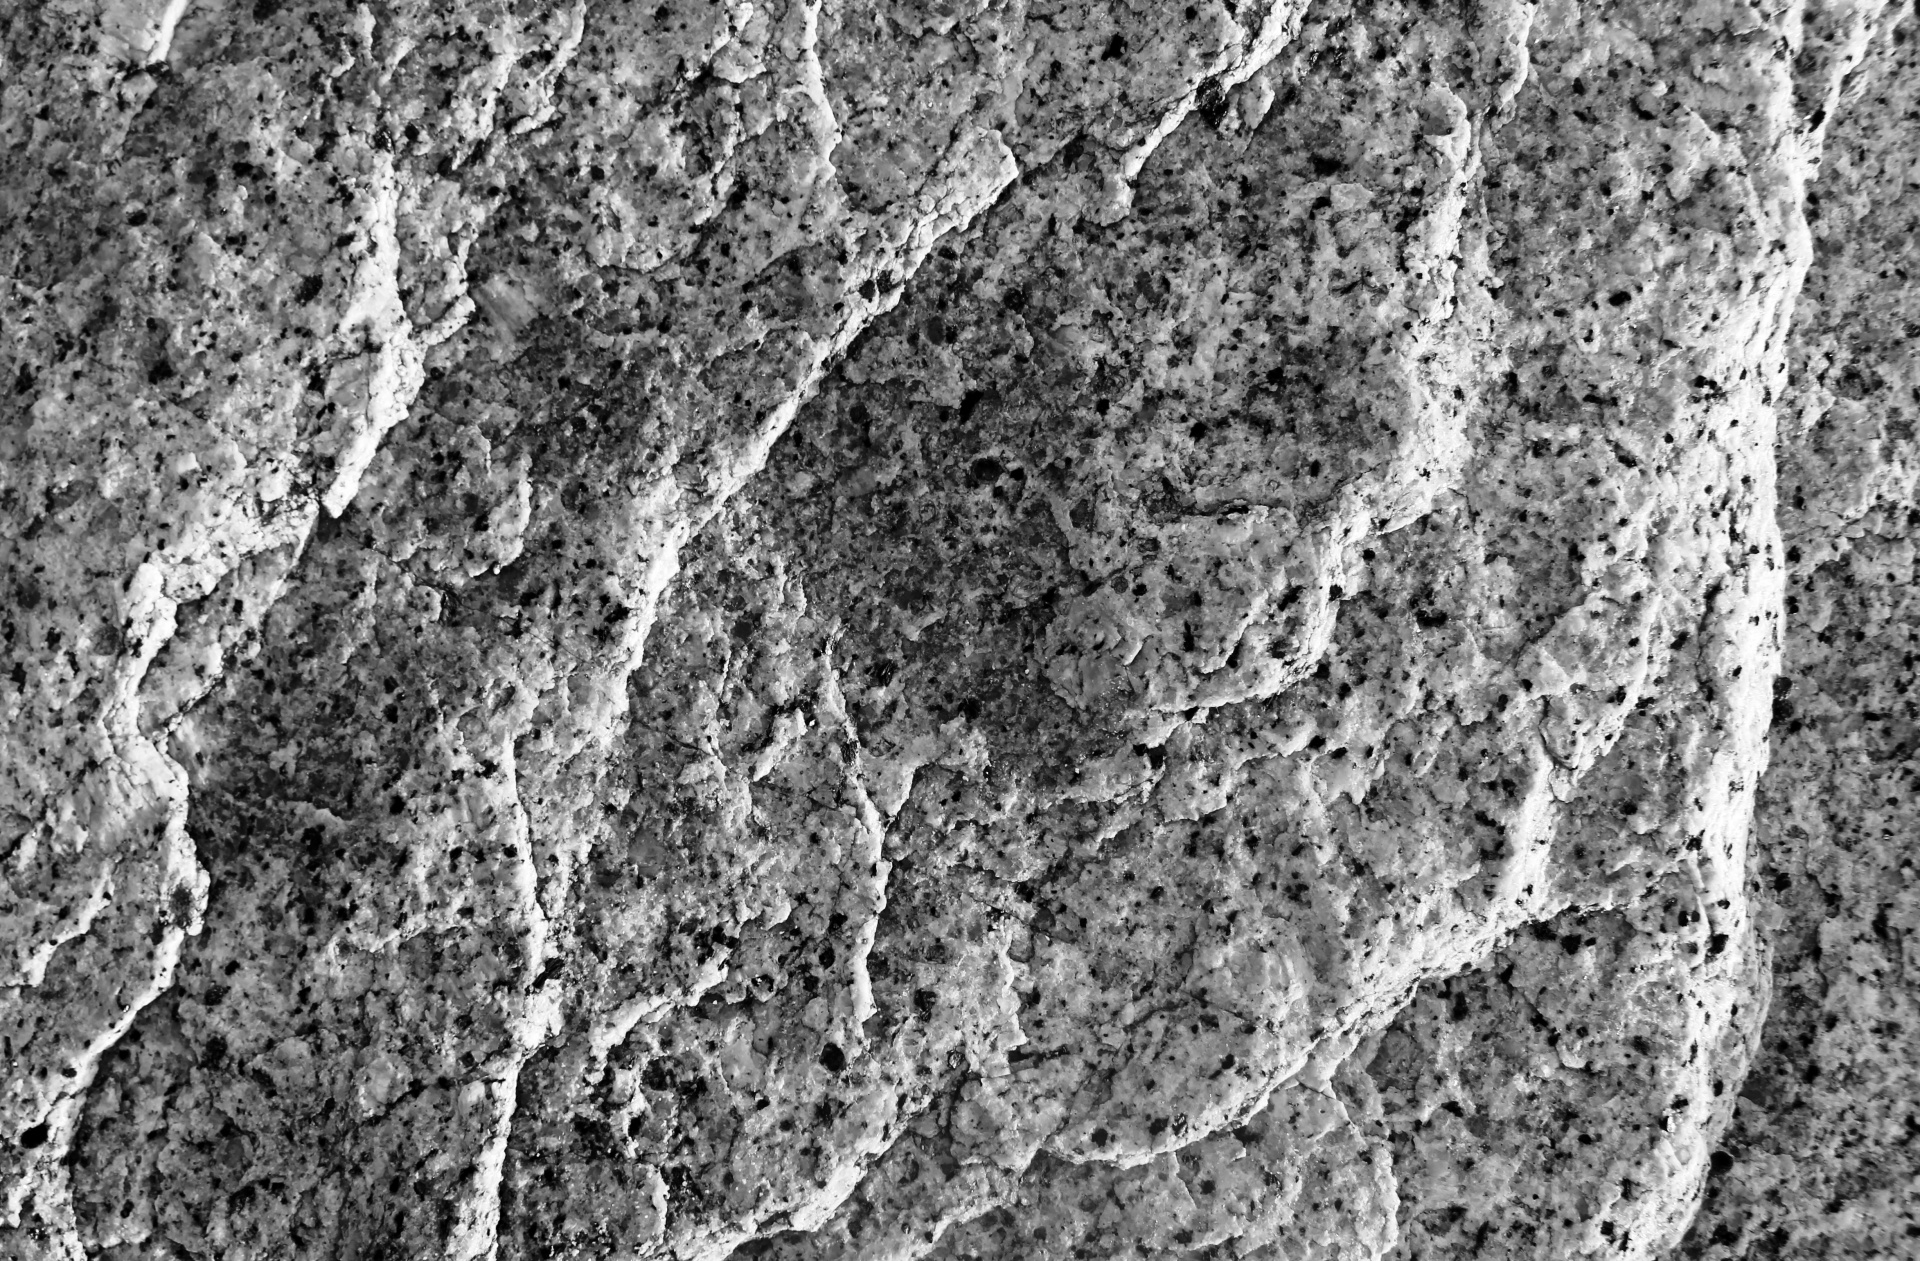 Chalky B&W Rock Texture